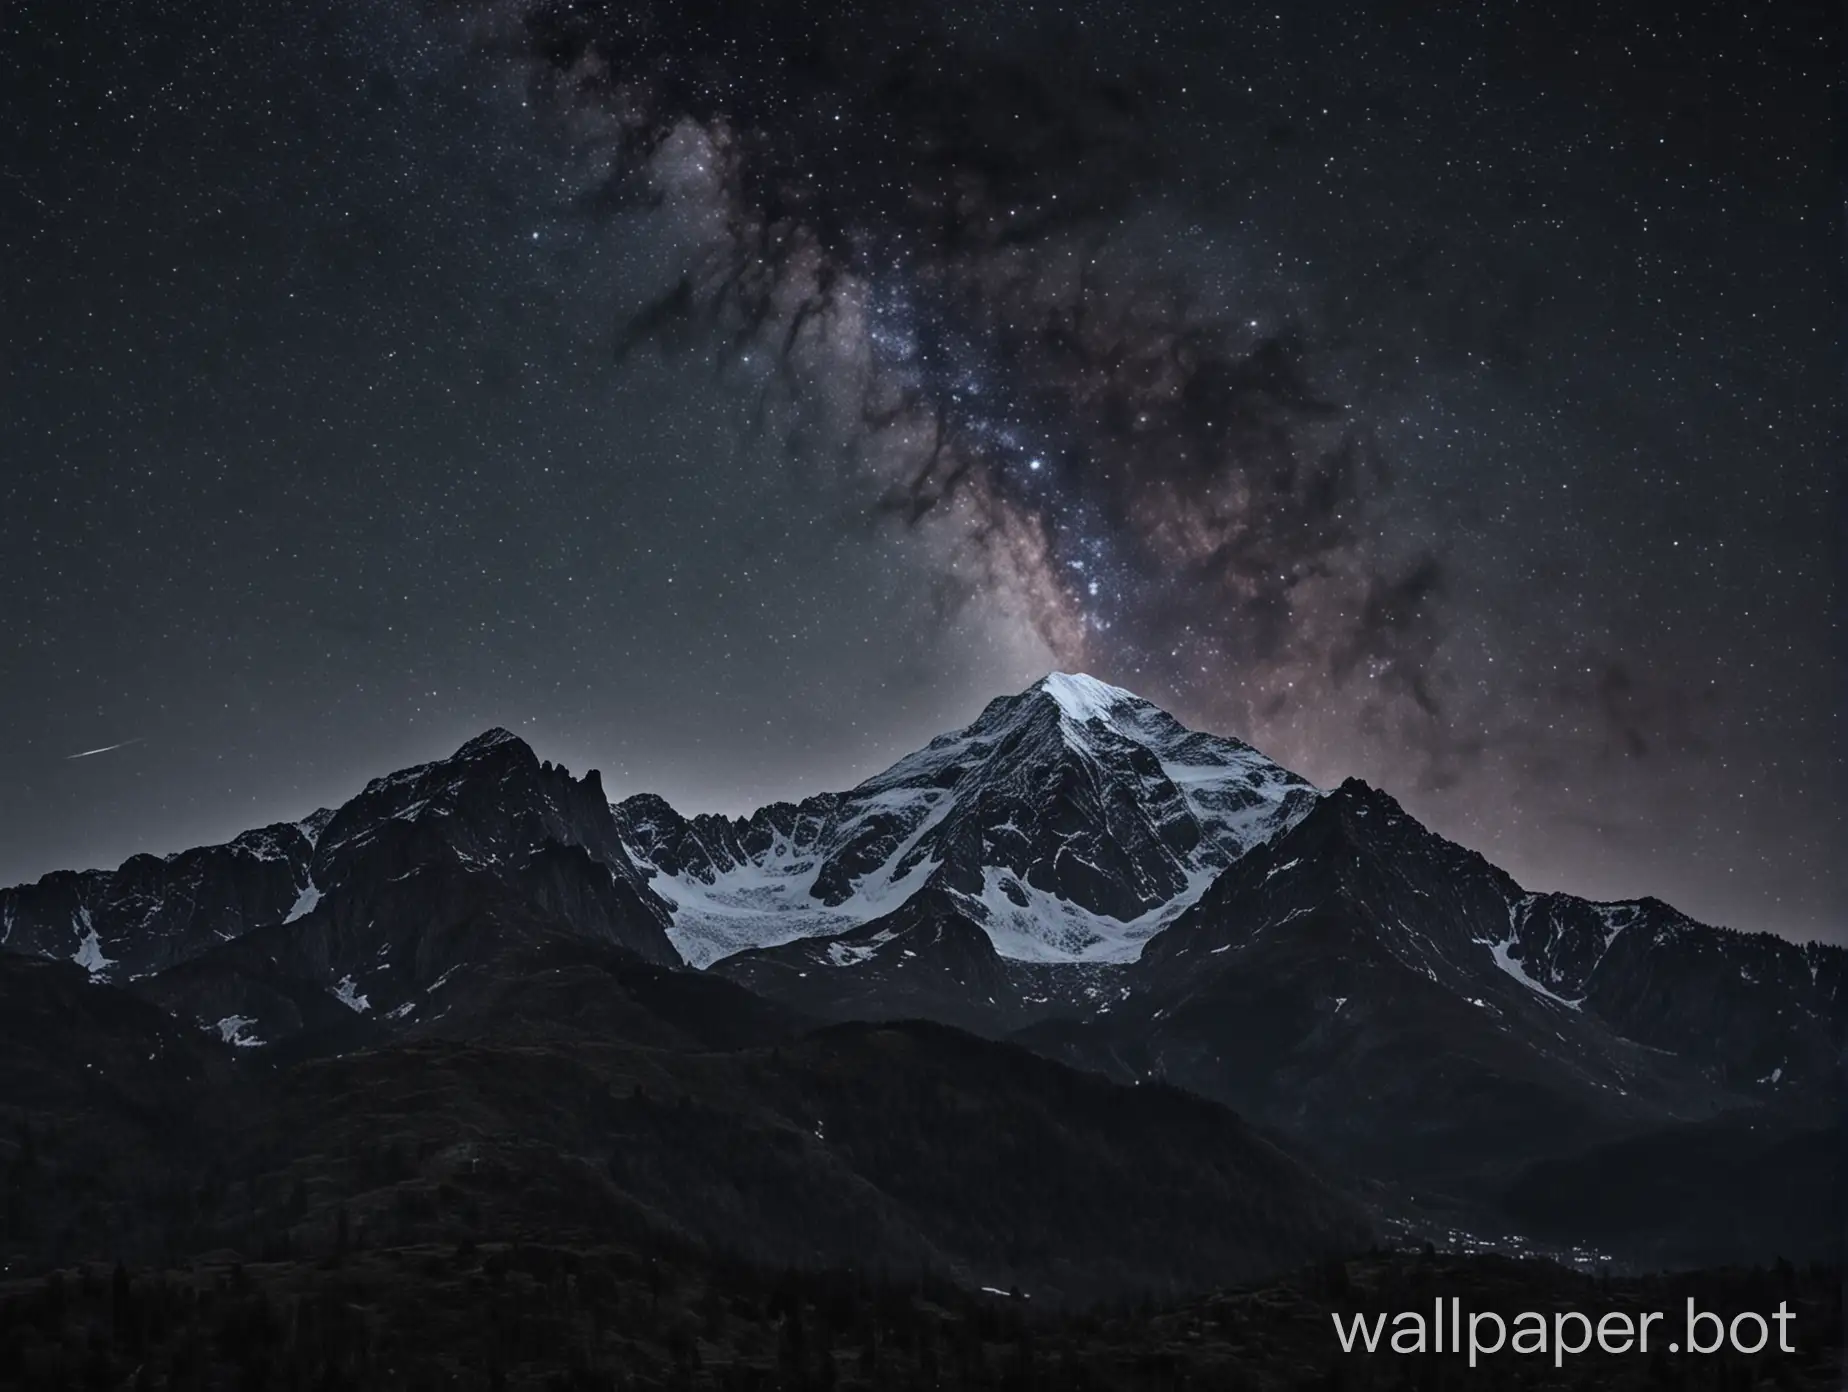 IMAGE FOR DESKTOP WITH DARK SKY OR SPACE MIDDLE MOUNTAIN